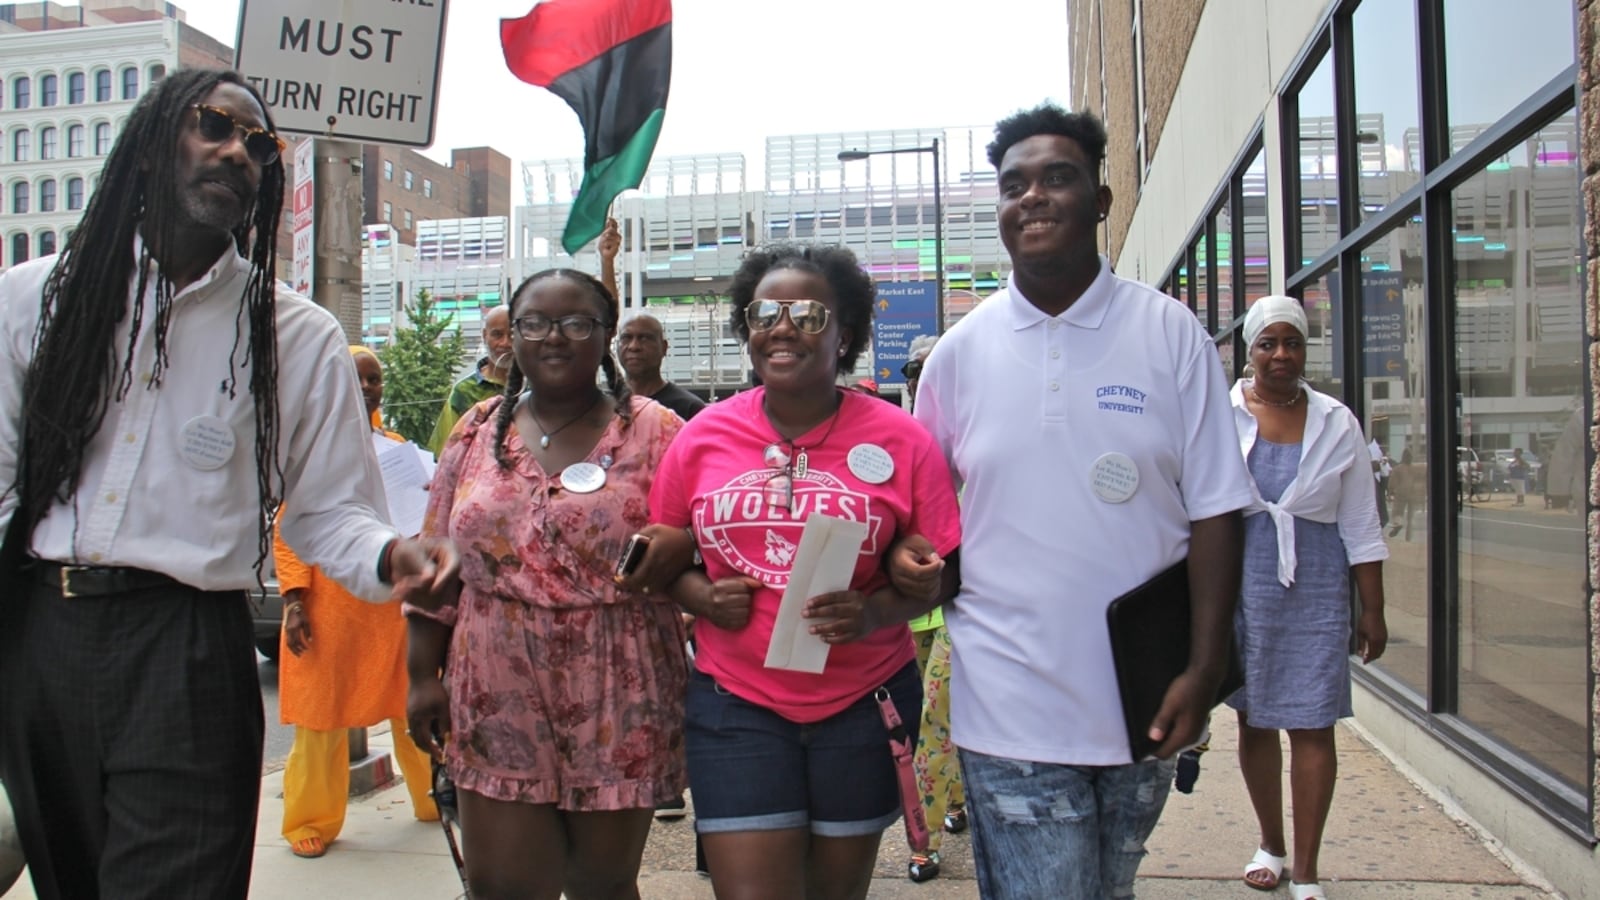 Cheyney students (from right) Shaquille Harrison, Nyrie Watson and Shaneka Briggs link arms as they make their way to Gov. Tom Wolf's Philadelphia office on Eighth Street to deliver a letter demanding funds for the struggling historically black university.